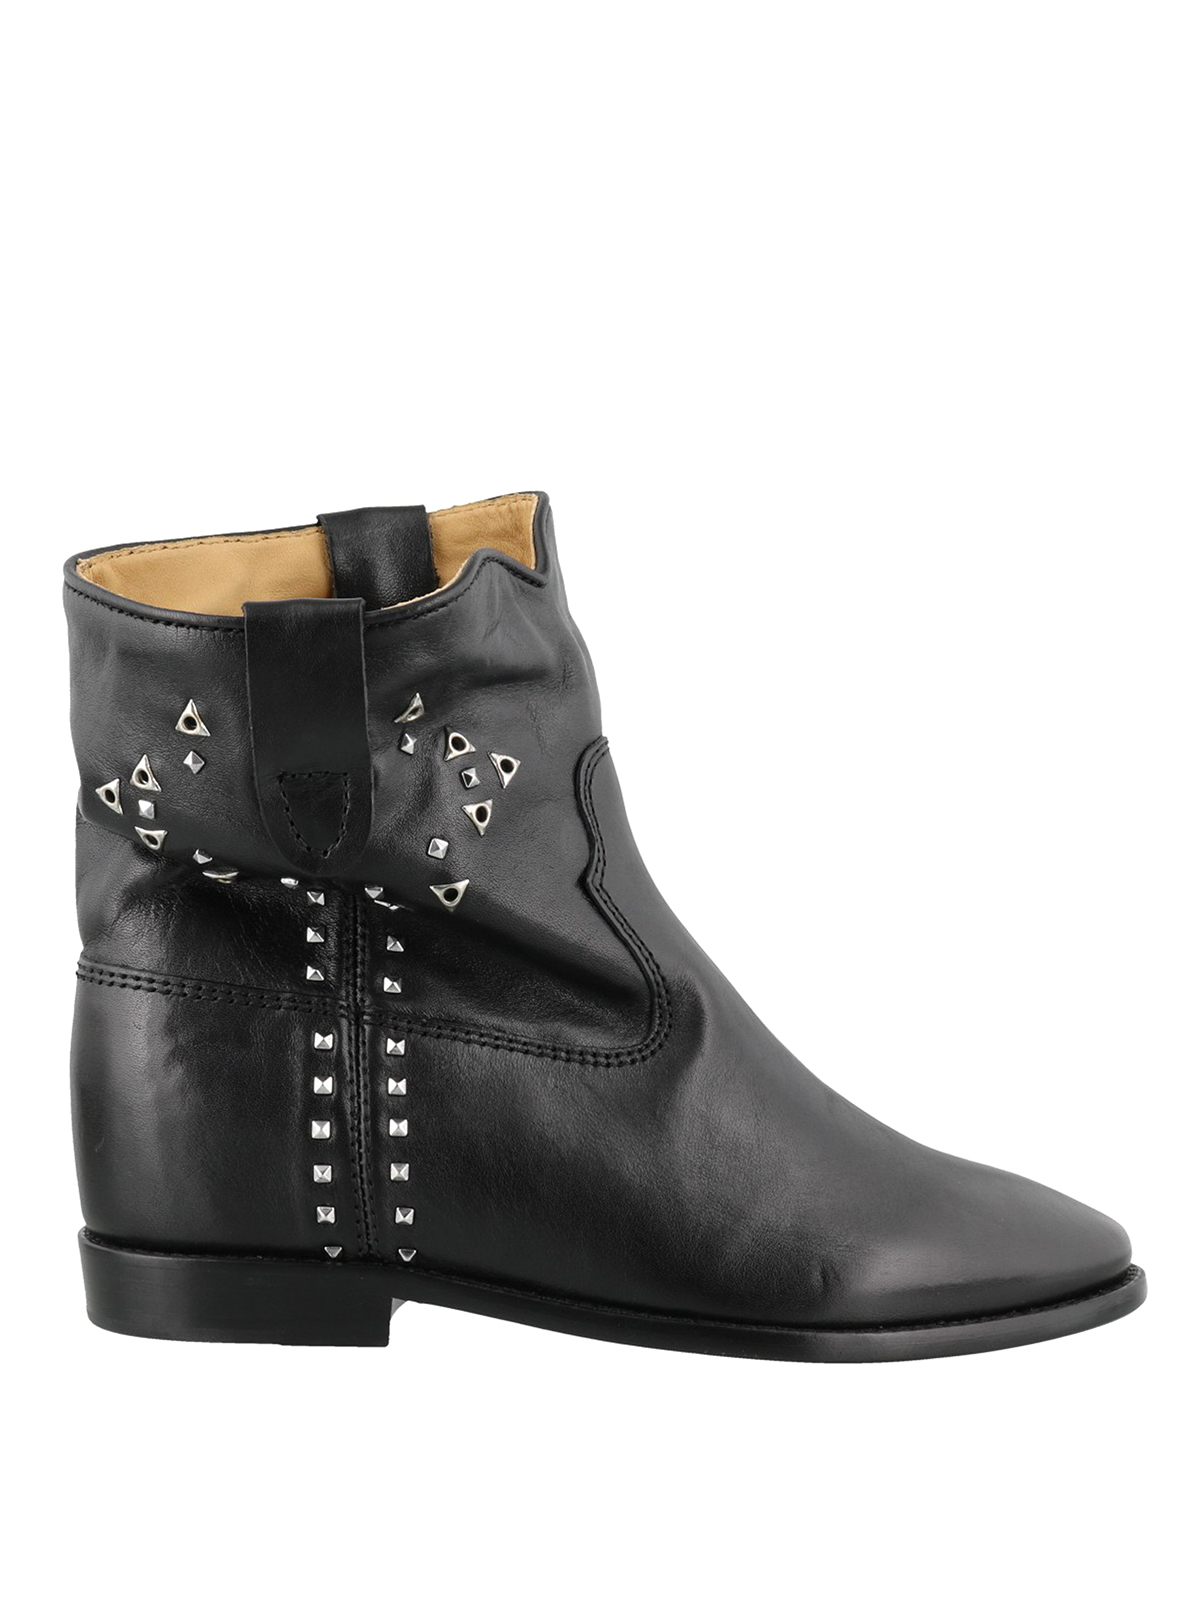 Ankle boots Isabel Marant black leather ankle boots - BO0104A062S01BK